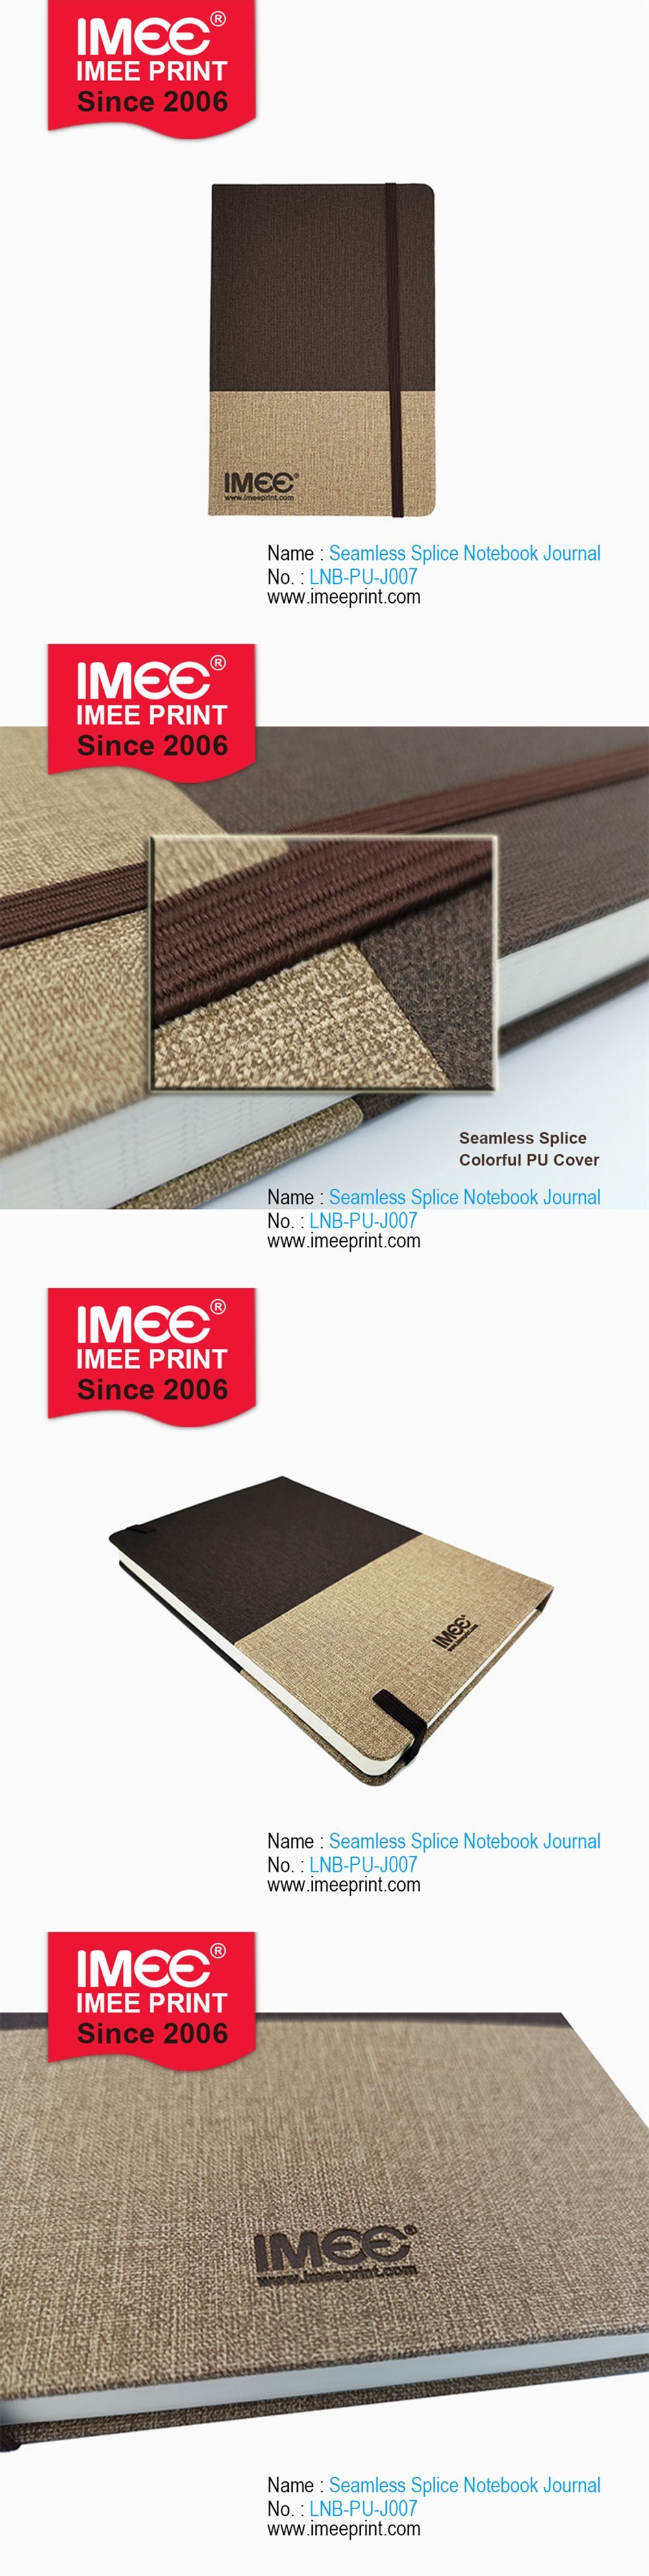 Imee Printing Custom China Simple Style Paperboard Paper Cover Pen Groove Slot Notebook